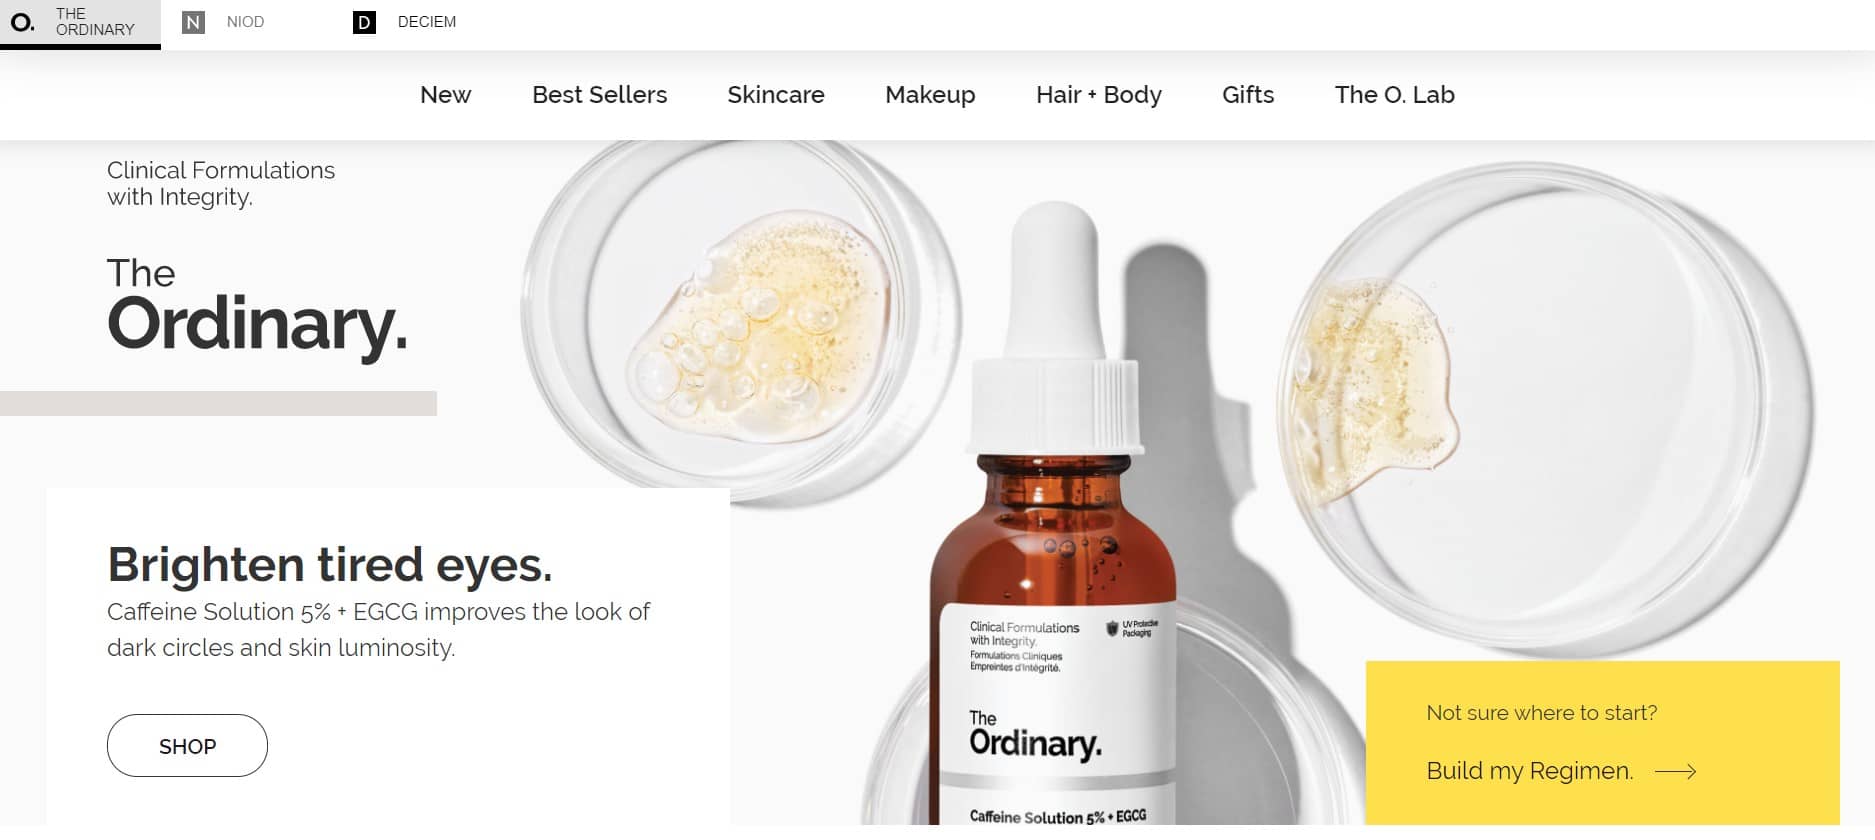 The Ordinary homepage